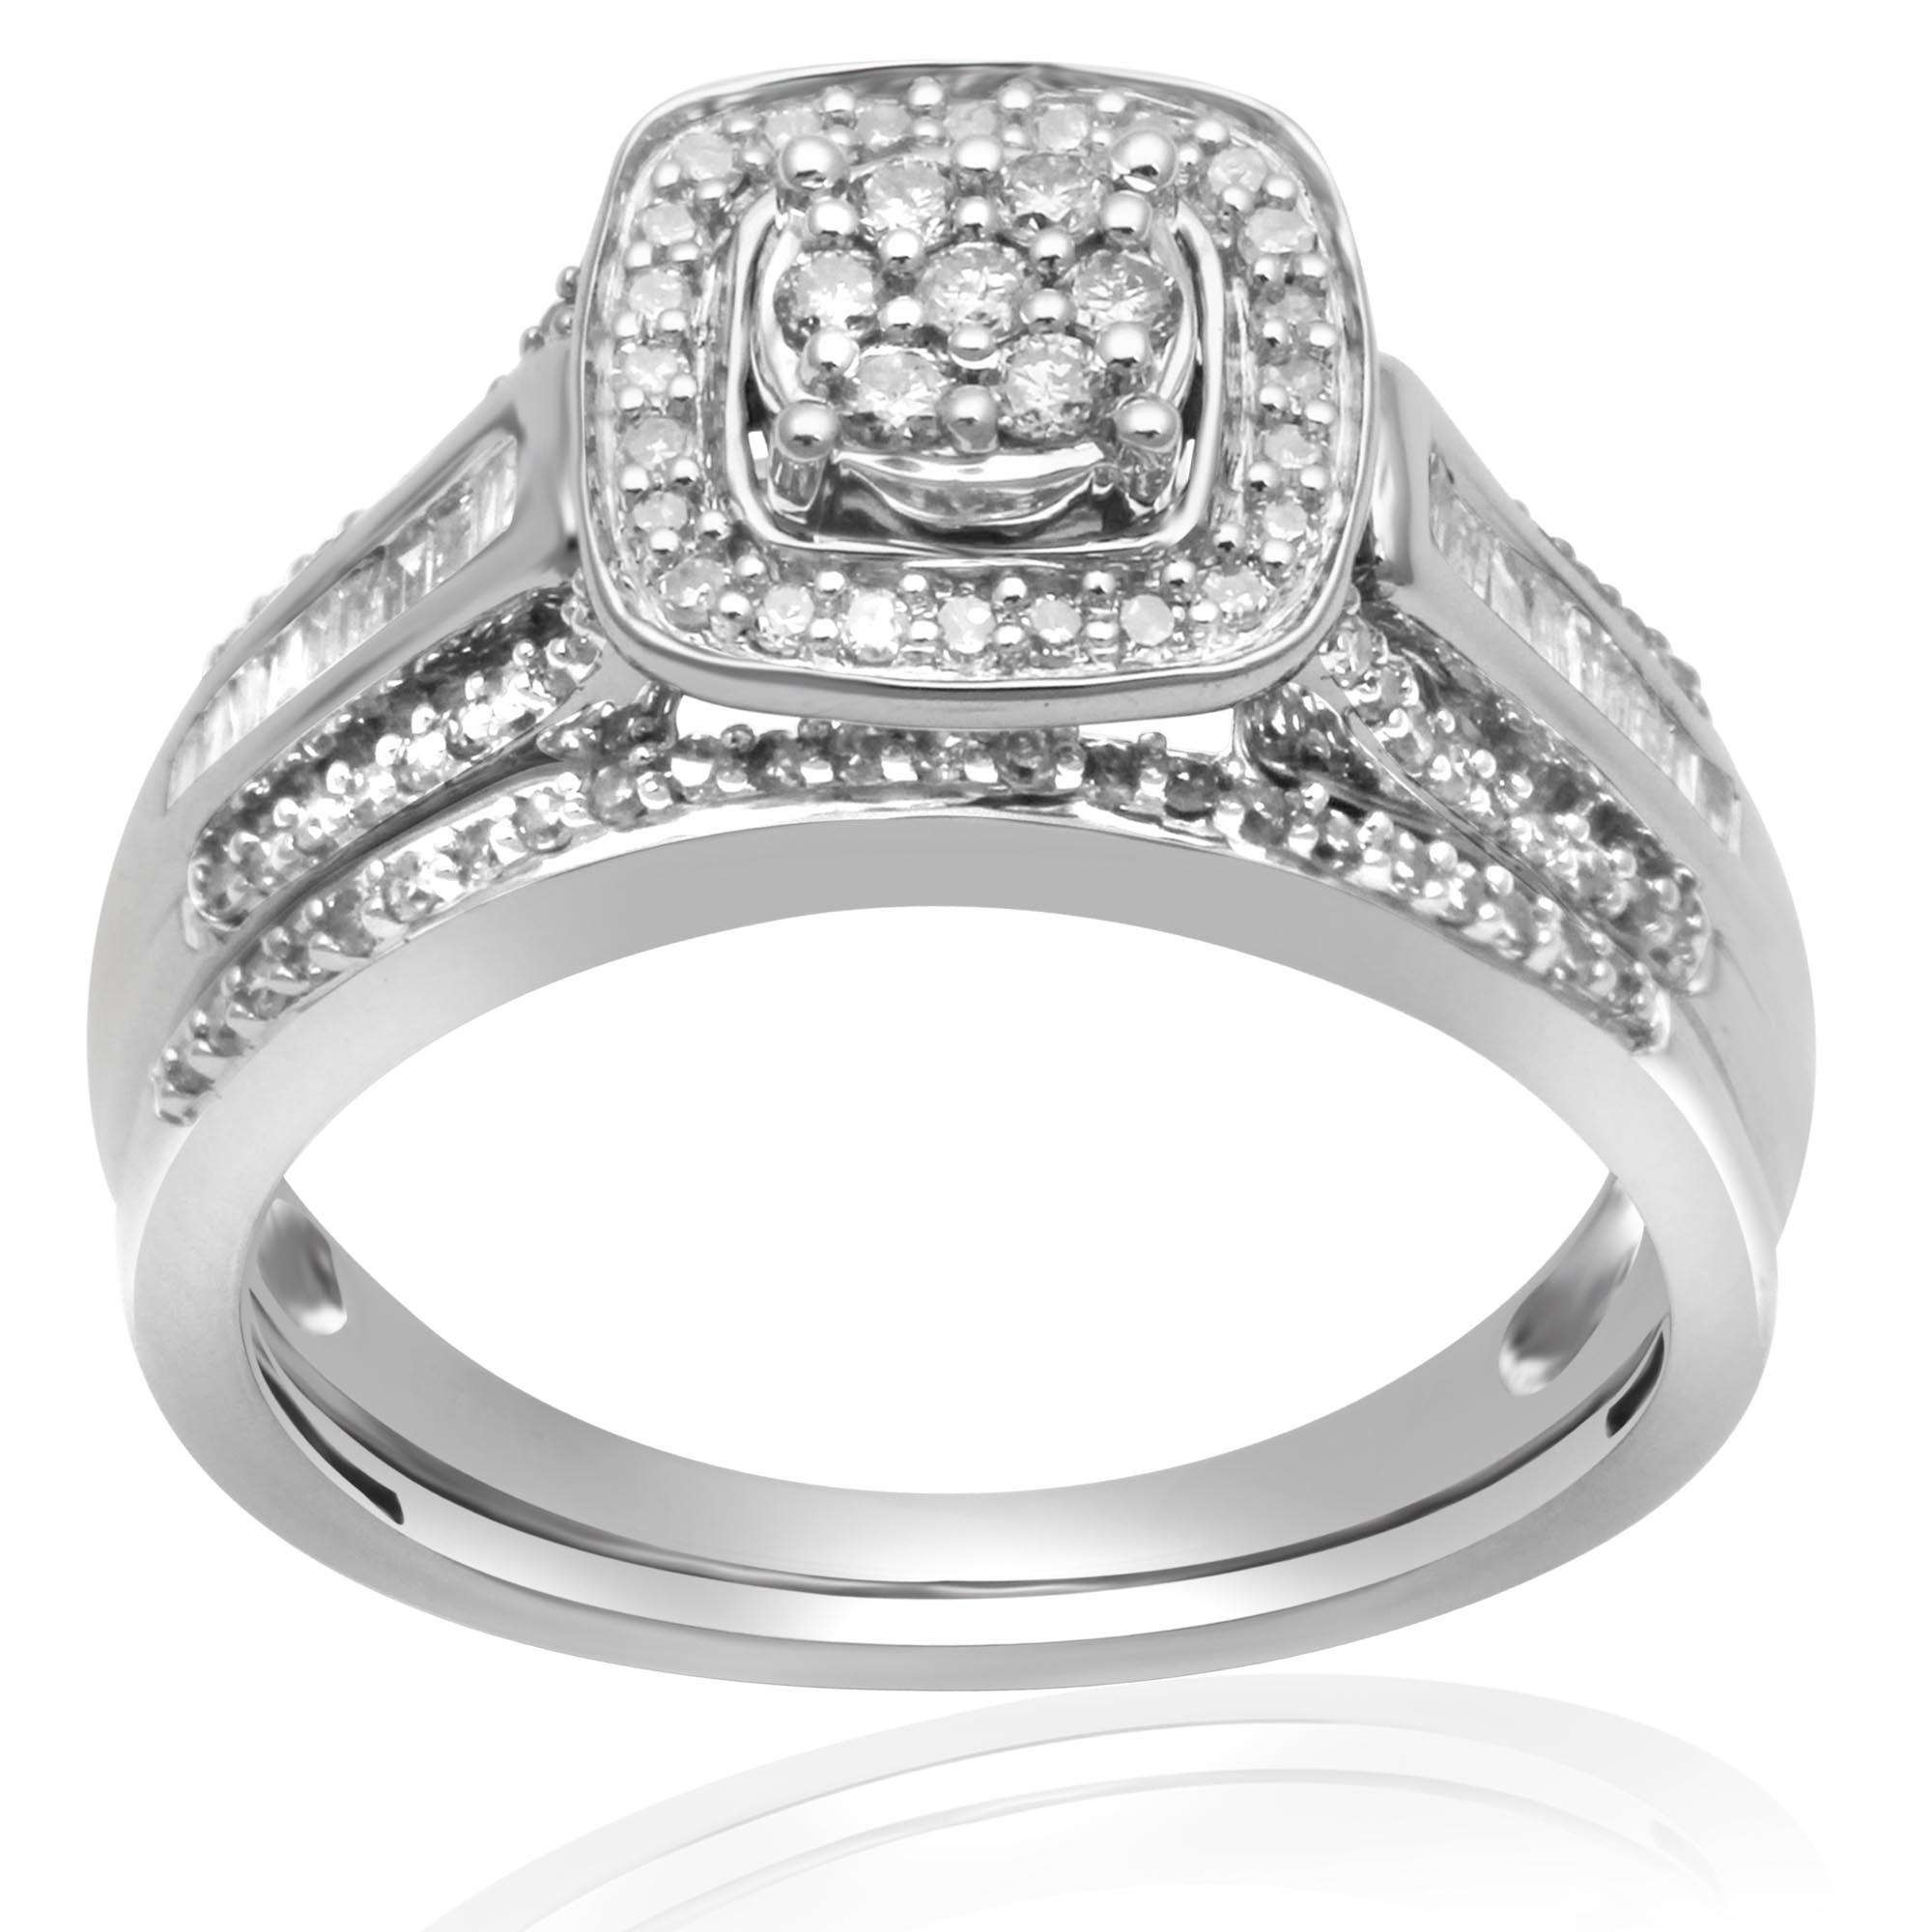 Sterling Silver Diamond Wedding Ring Sets
 Sterling Silver 1 2 cttw Diamond Square Halo Bridal Set